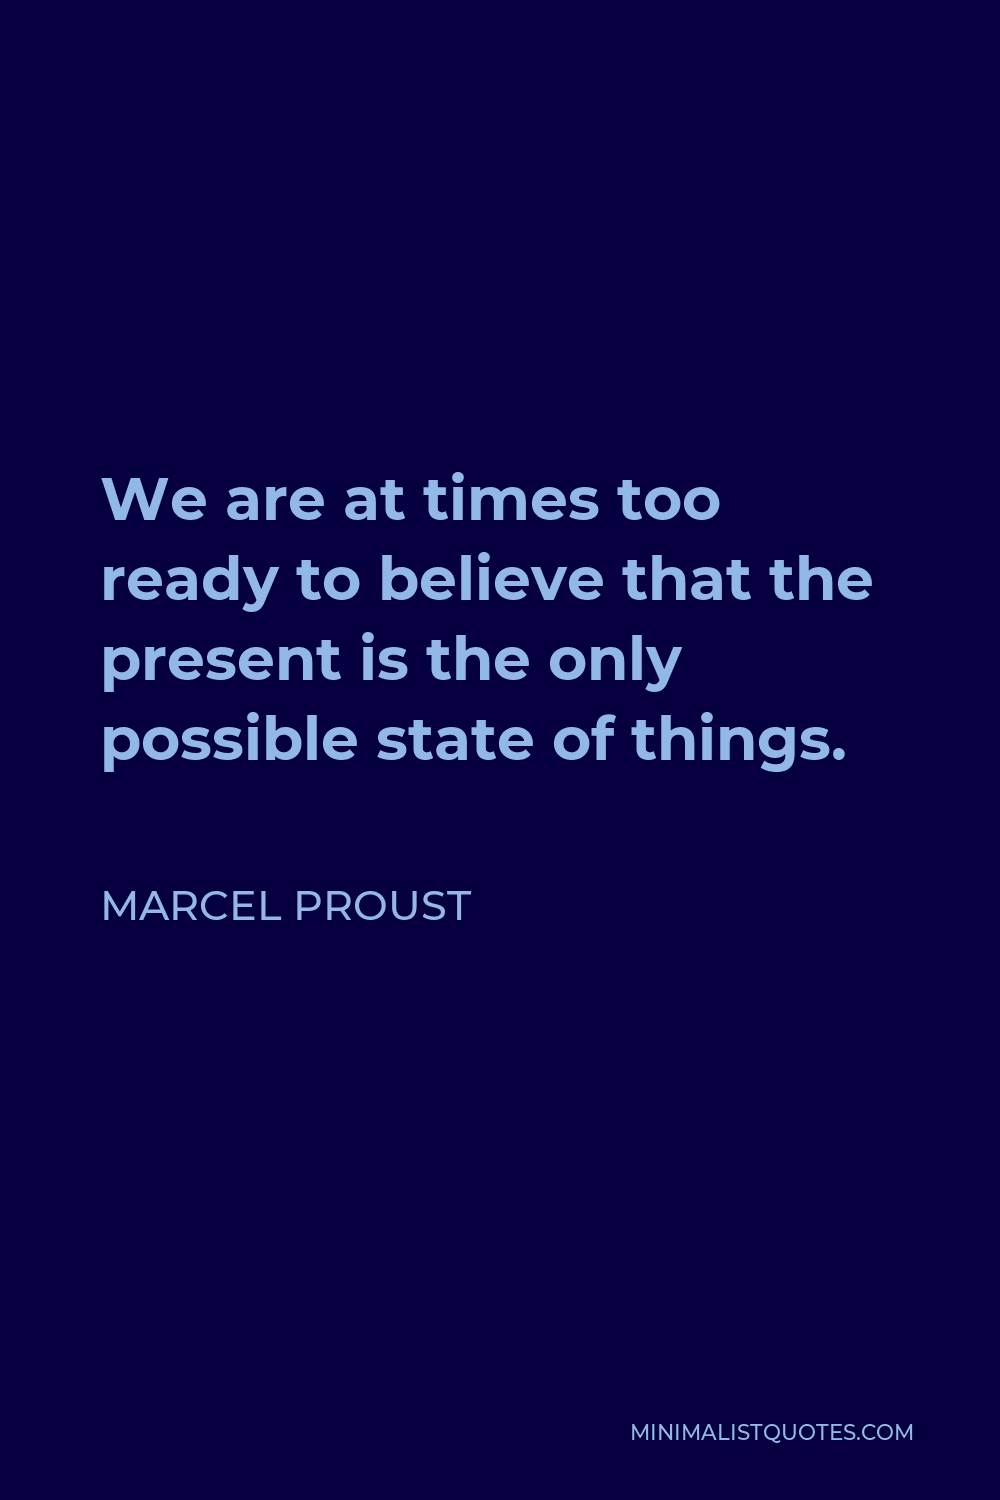 Marcel Proust Quote - We are at times too ready to believe that the present is the only possible state of things.